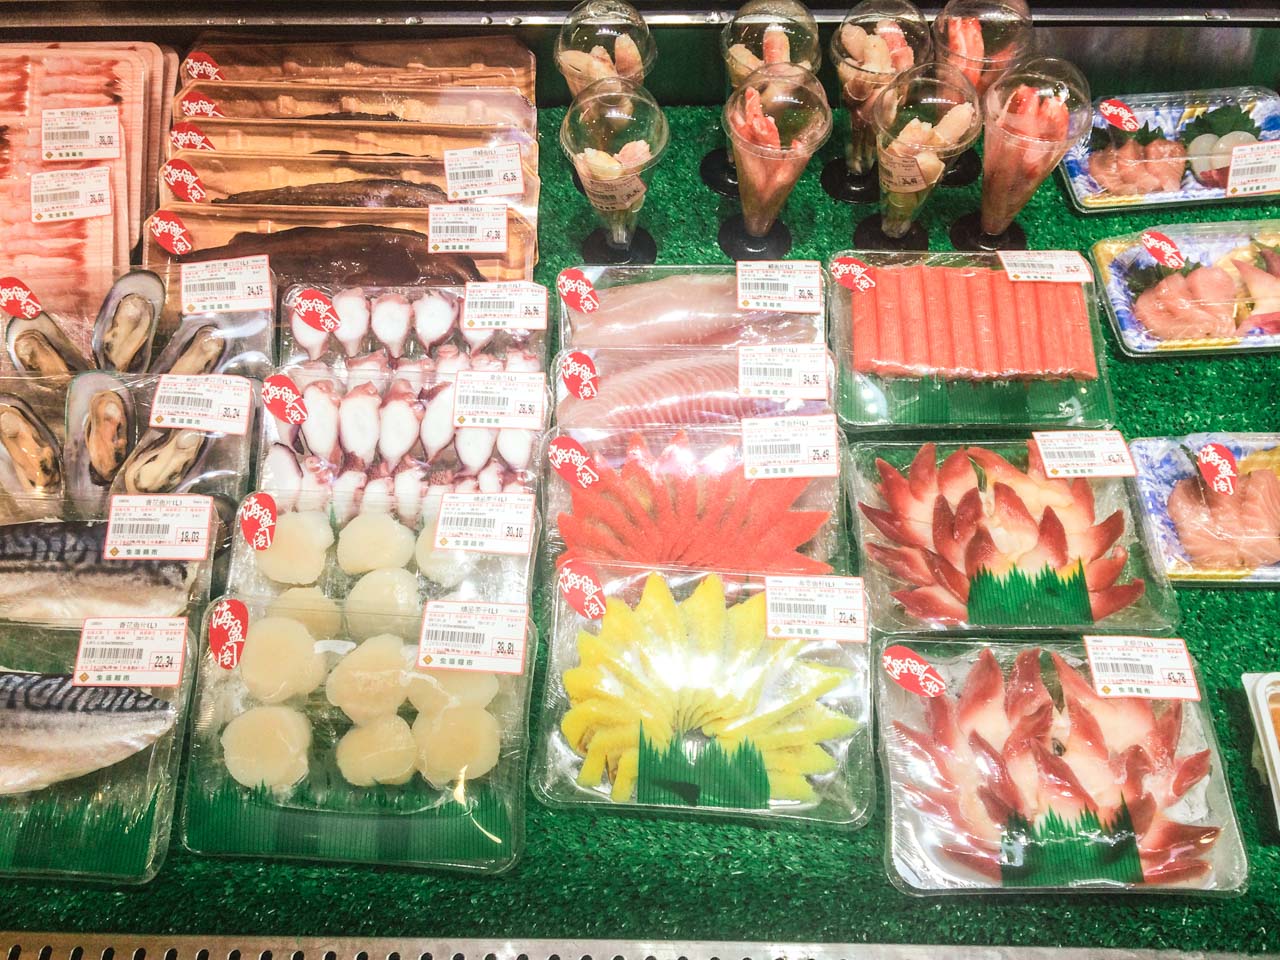 Various types of fruits, vegetables and seafood inside a display case at a supermarket in Beijing